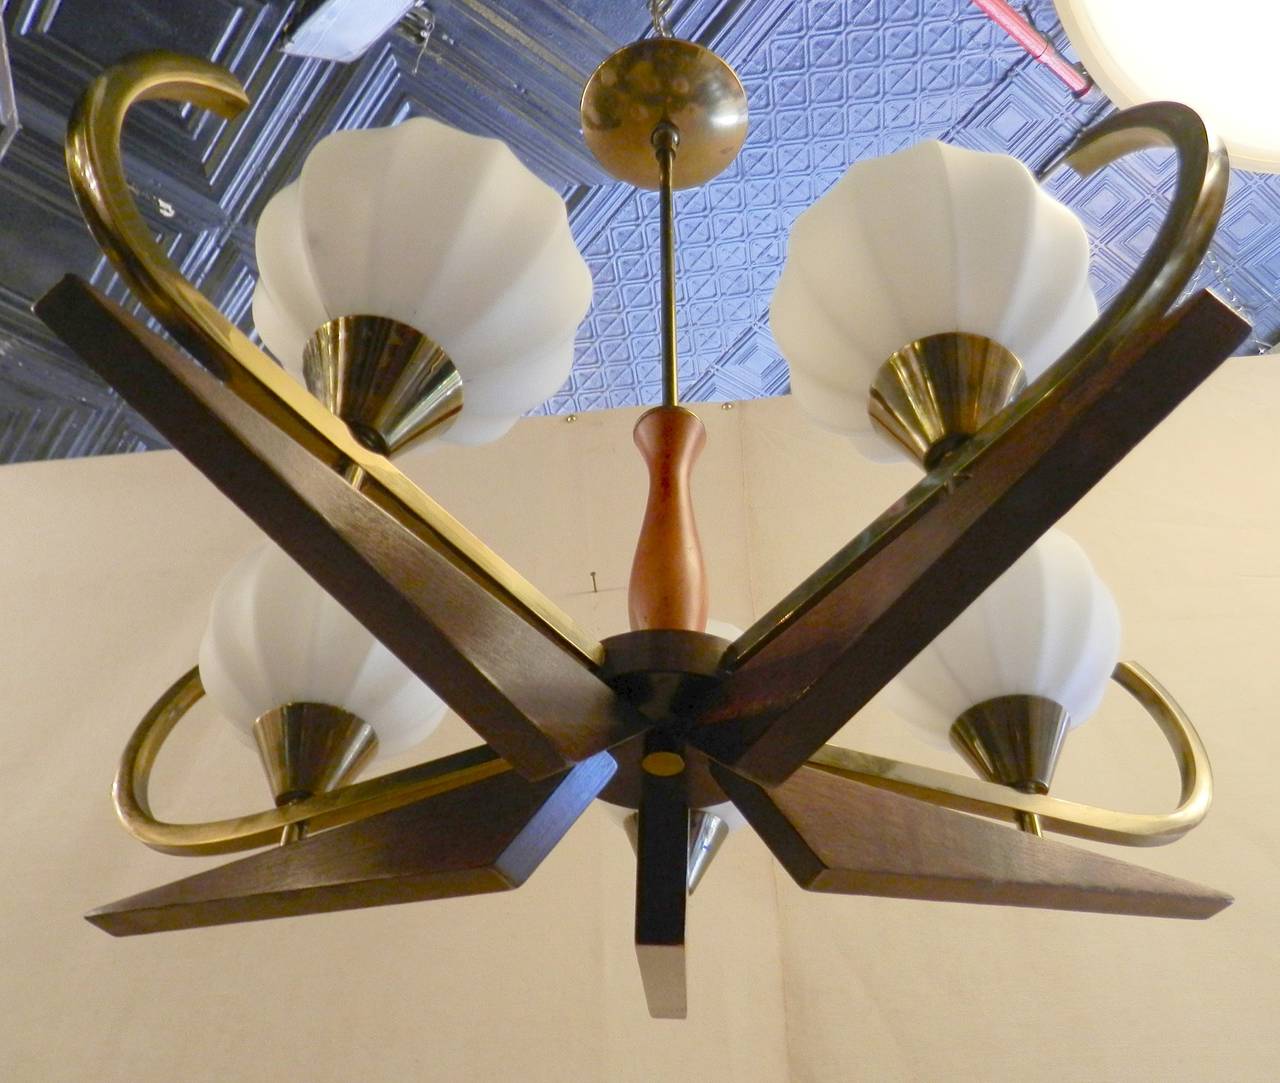 Five arm chandelier featuring brass arms, walnut accents and milk white glass globes. Long thin stem to ceiling mount. Attractive lighting for dining room or entry way.

(Please confirm item location - NY or NJ - with dealer)